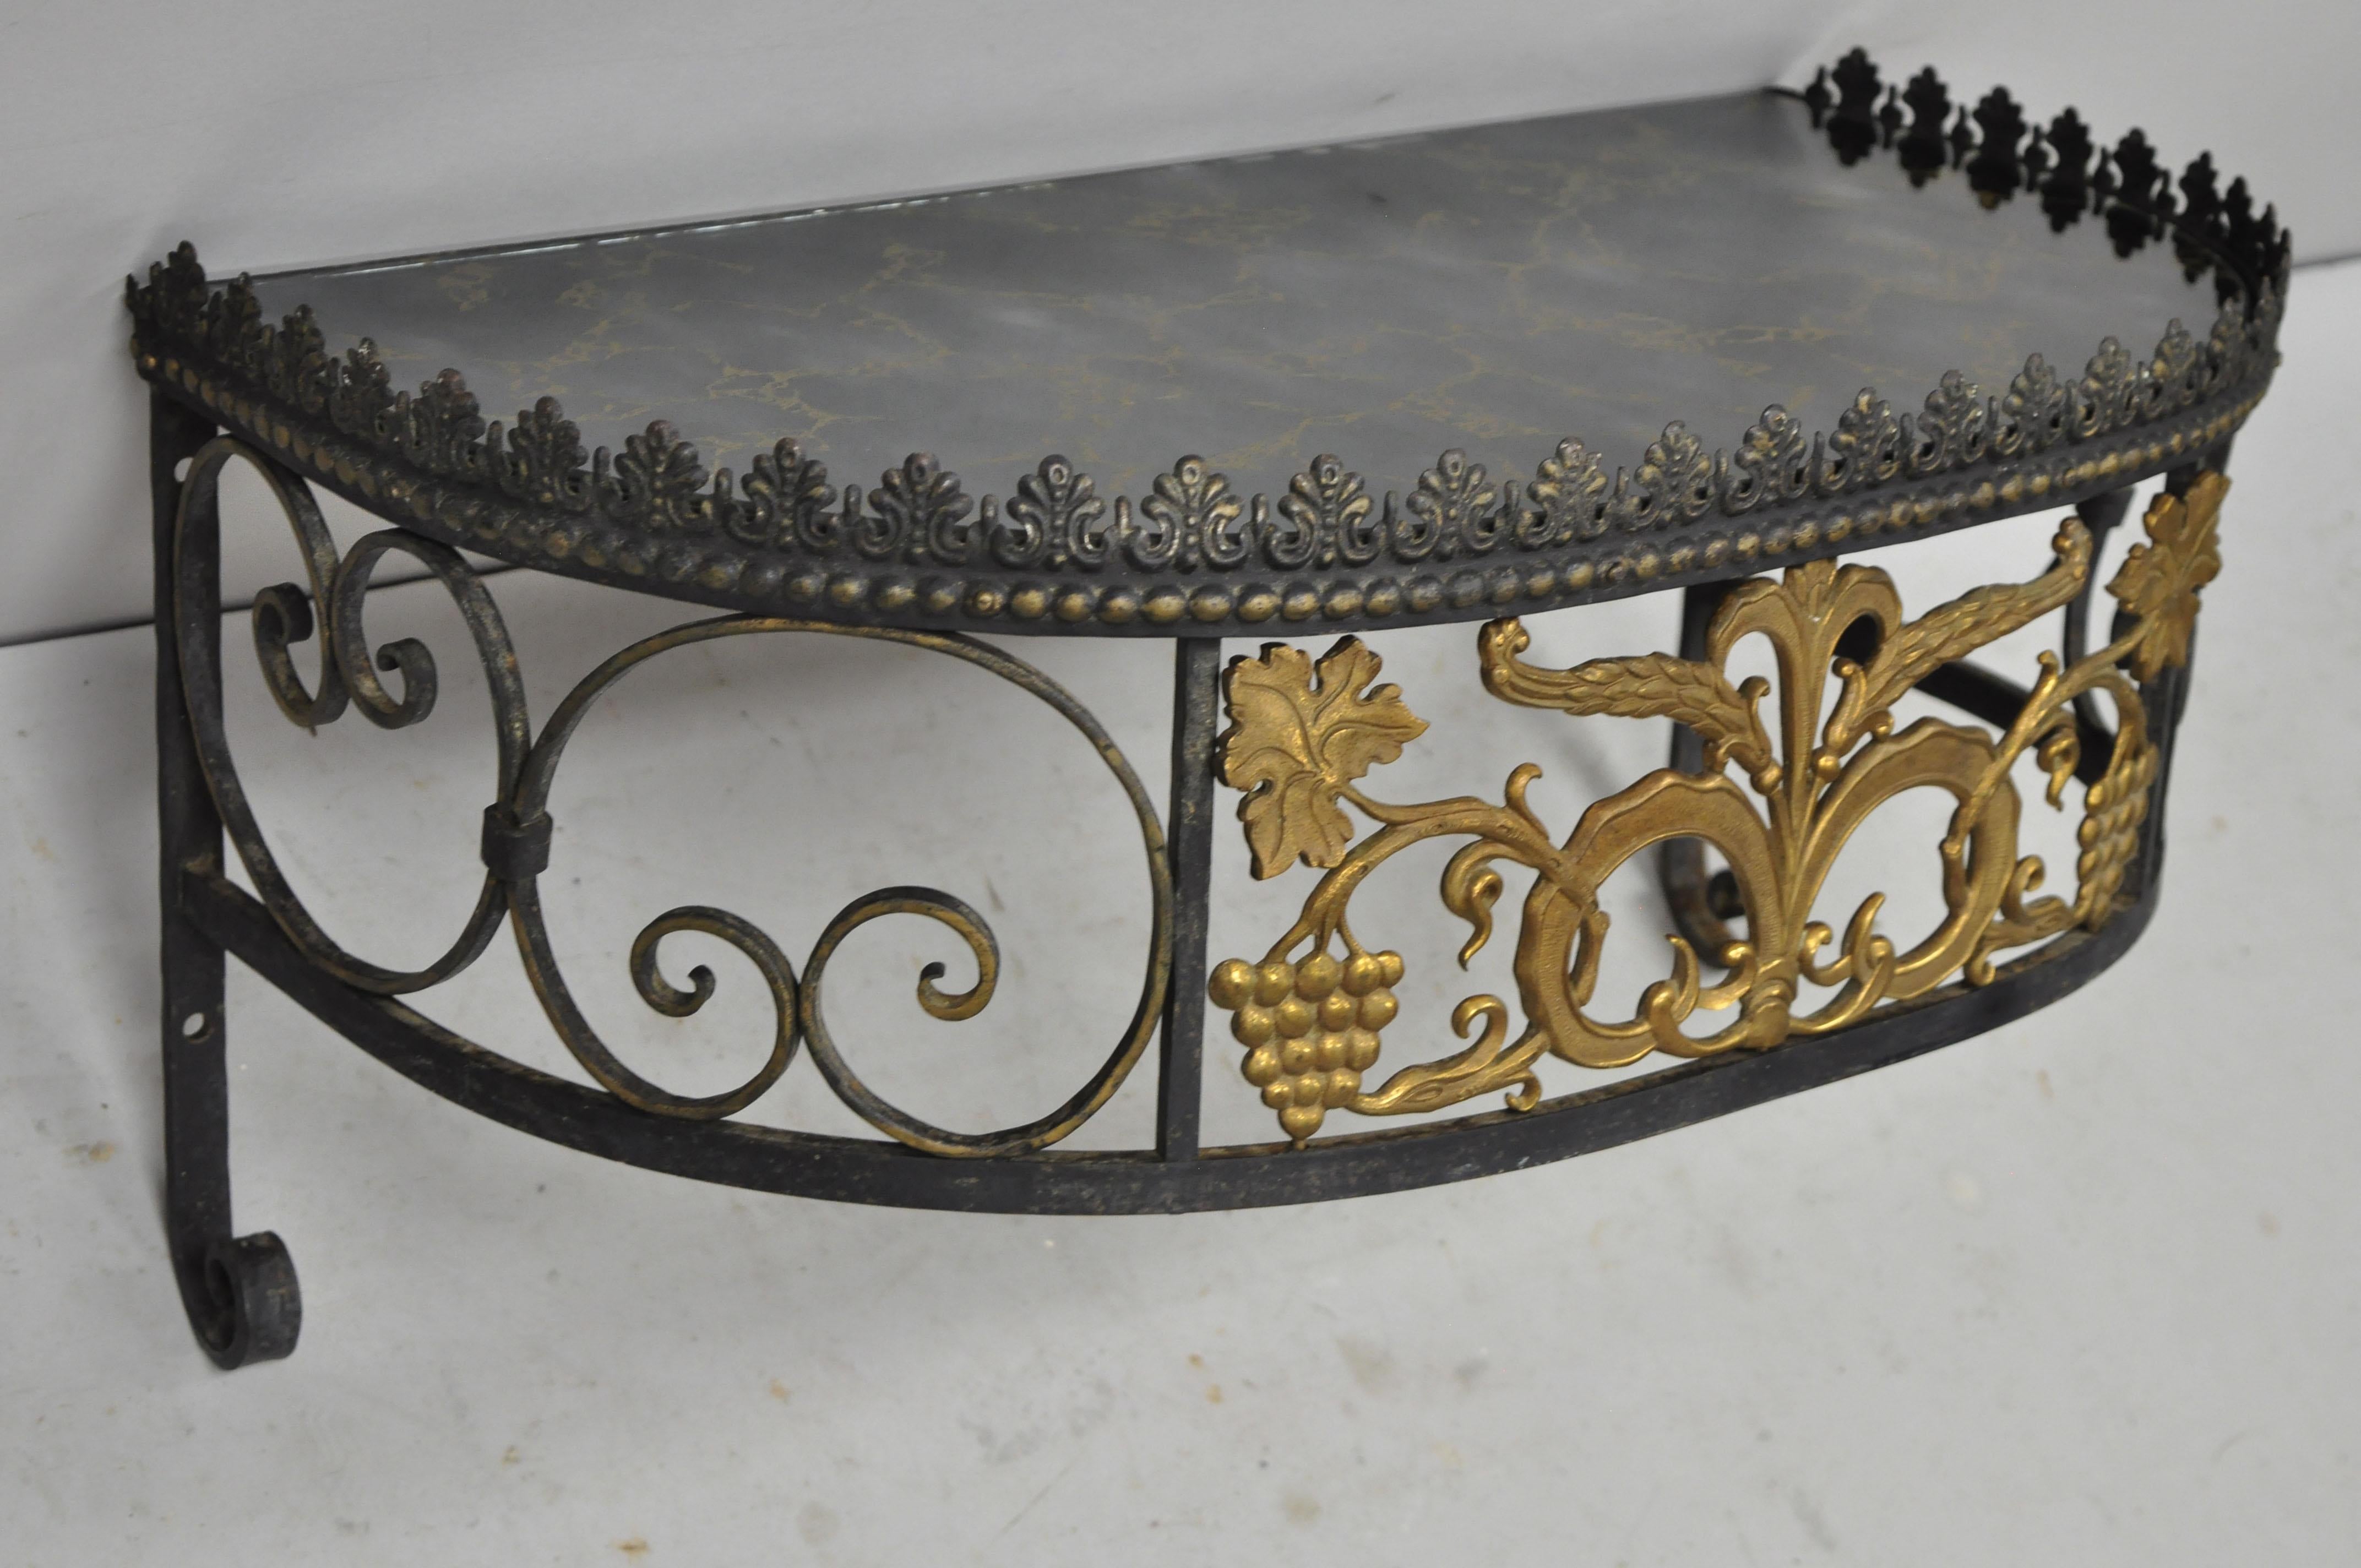 Antique French Art Nouveau Scrolling Wrought Iron & Glass Grapevine Maple Leaf Wall Mounted Console Table. Item features half round eglomise glass top, scrolling wrought iron frame, maple and grapevine design, wrought iron construction, very nice